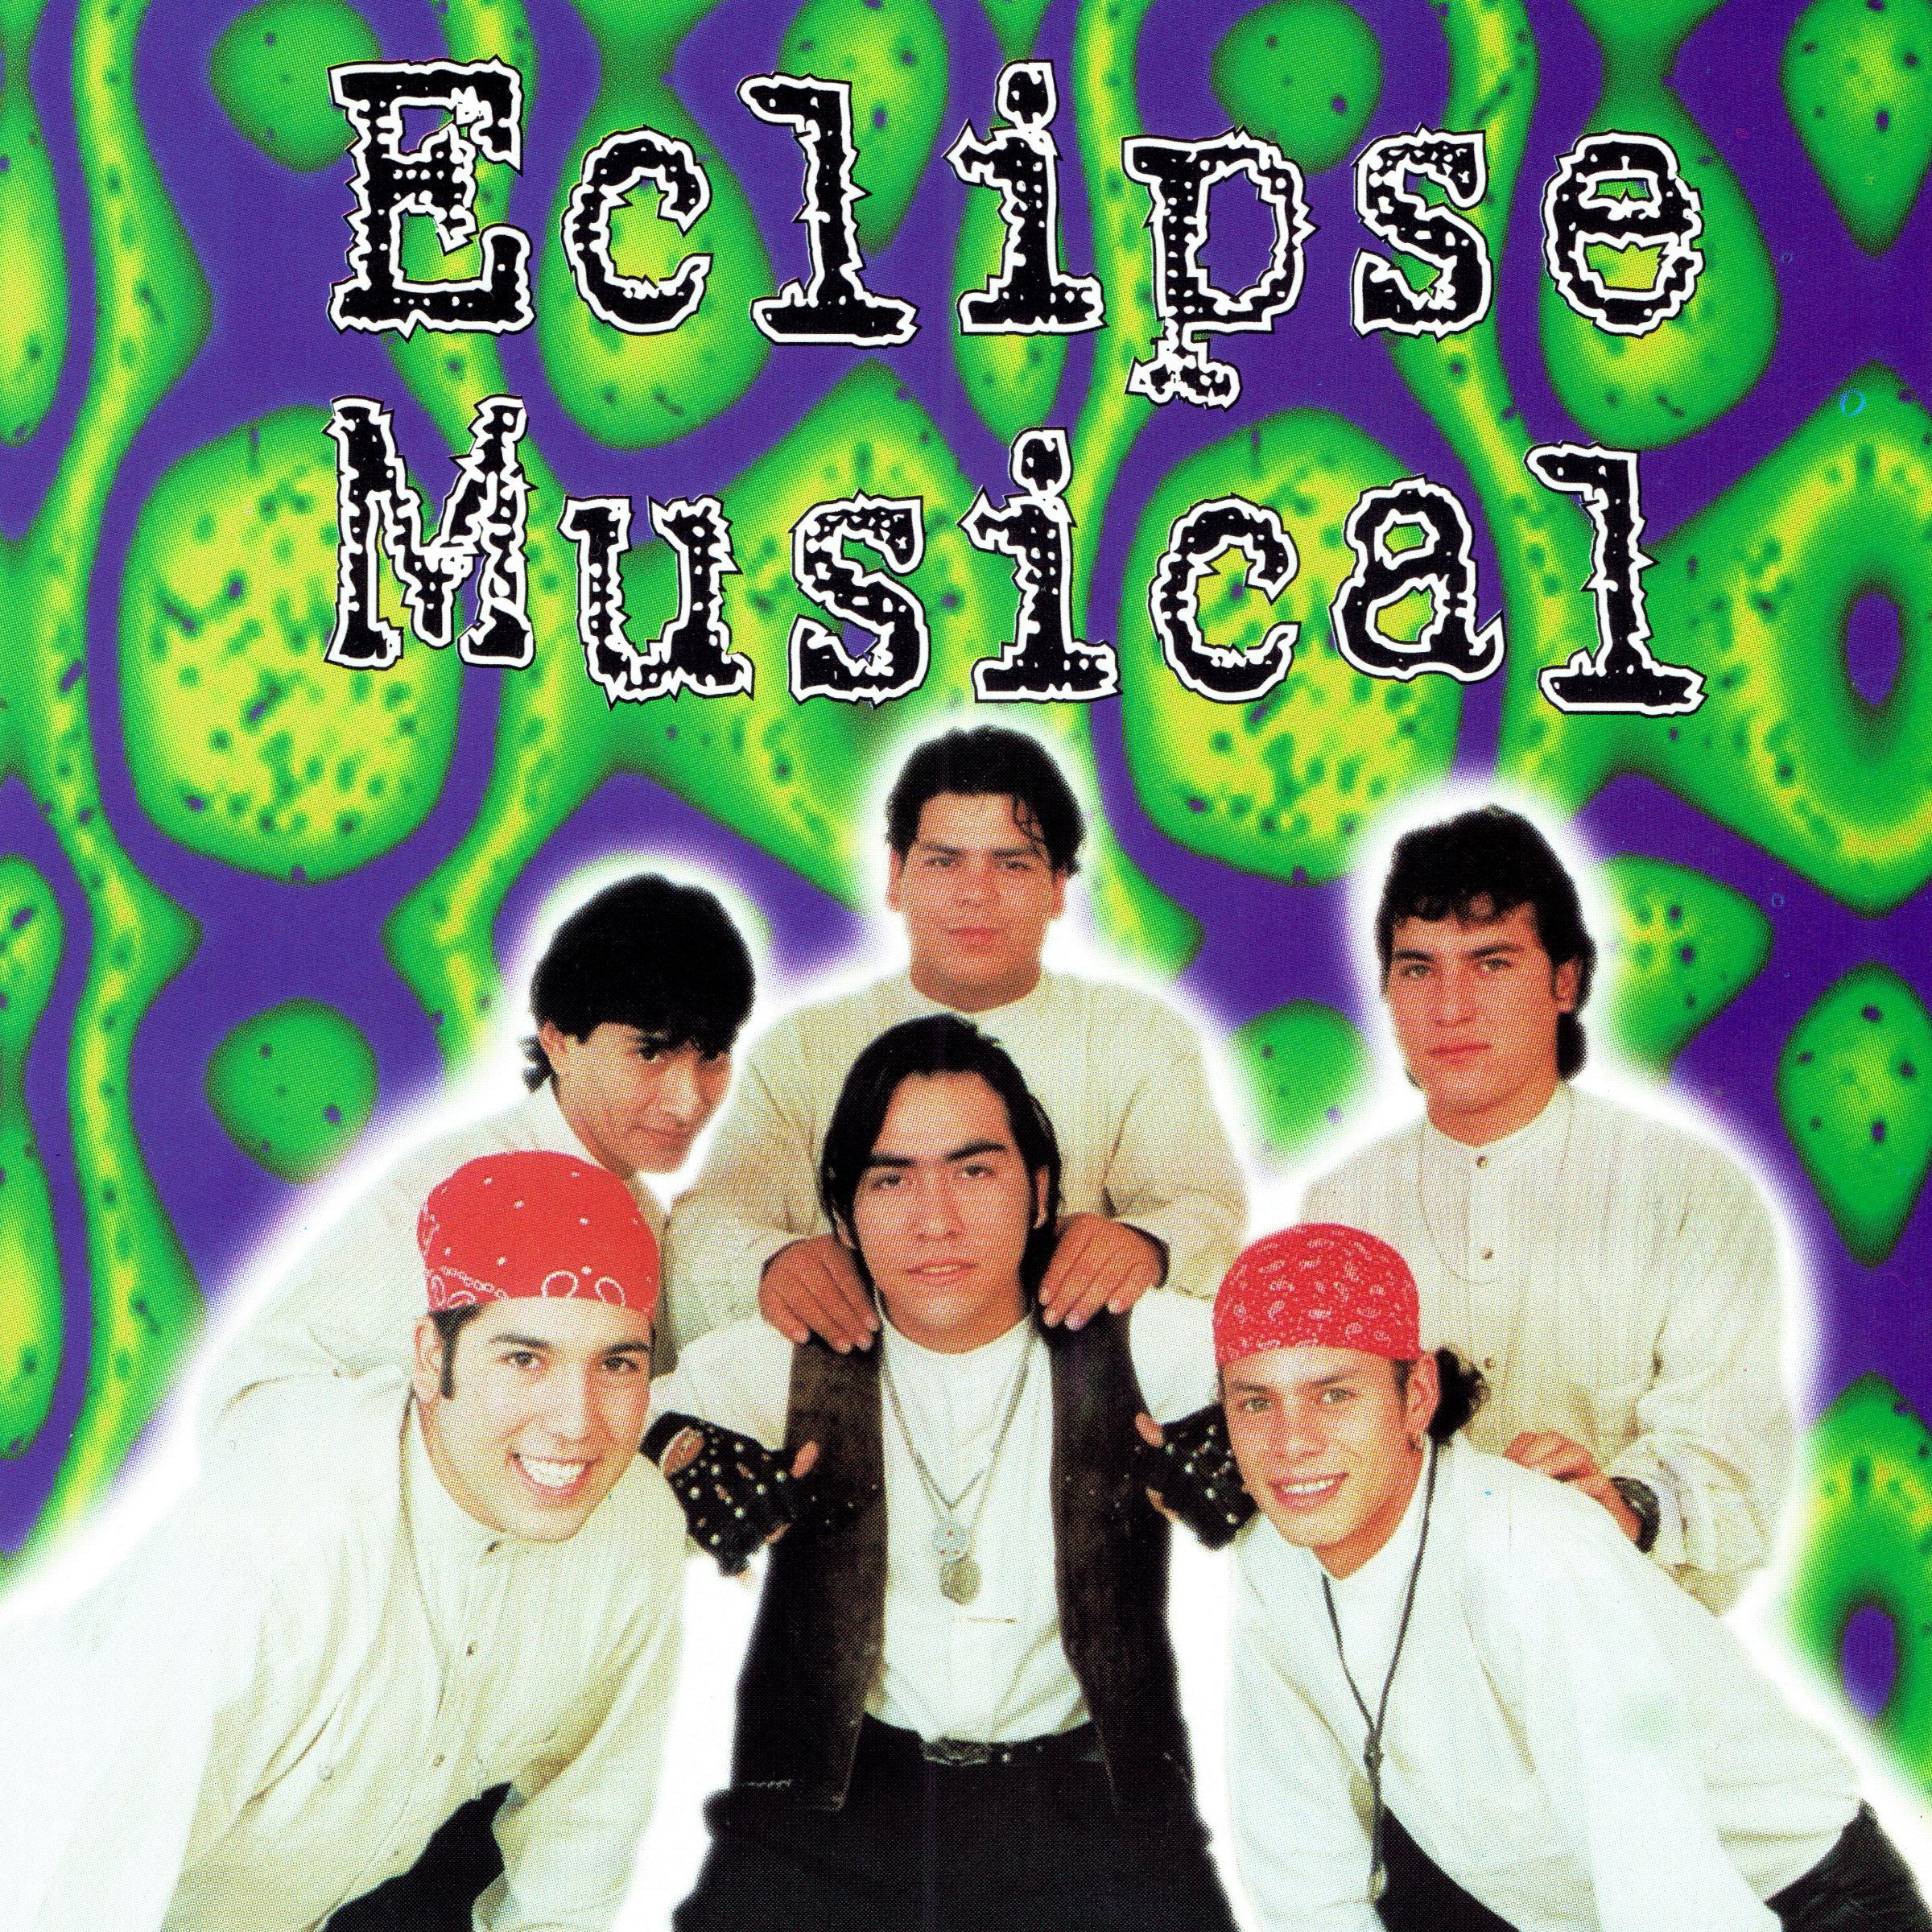 Eclipse Musical